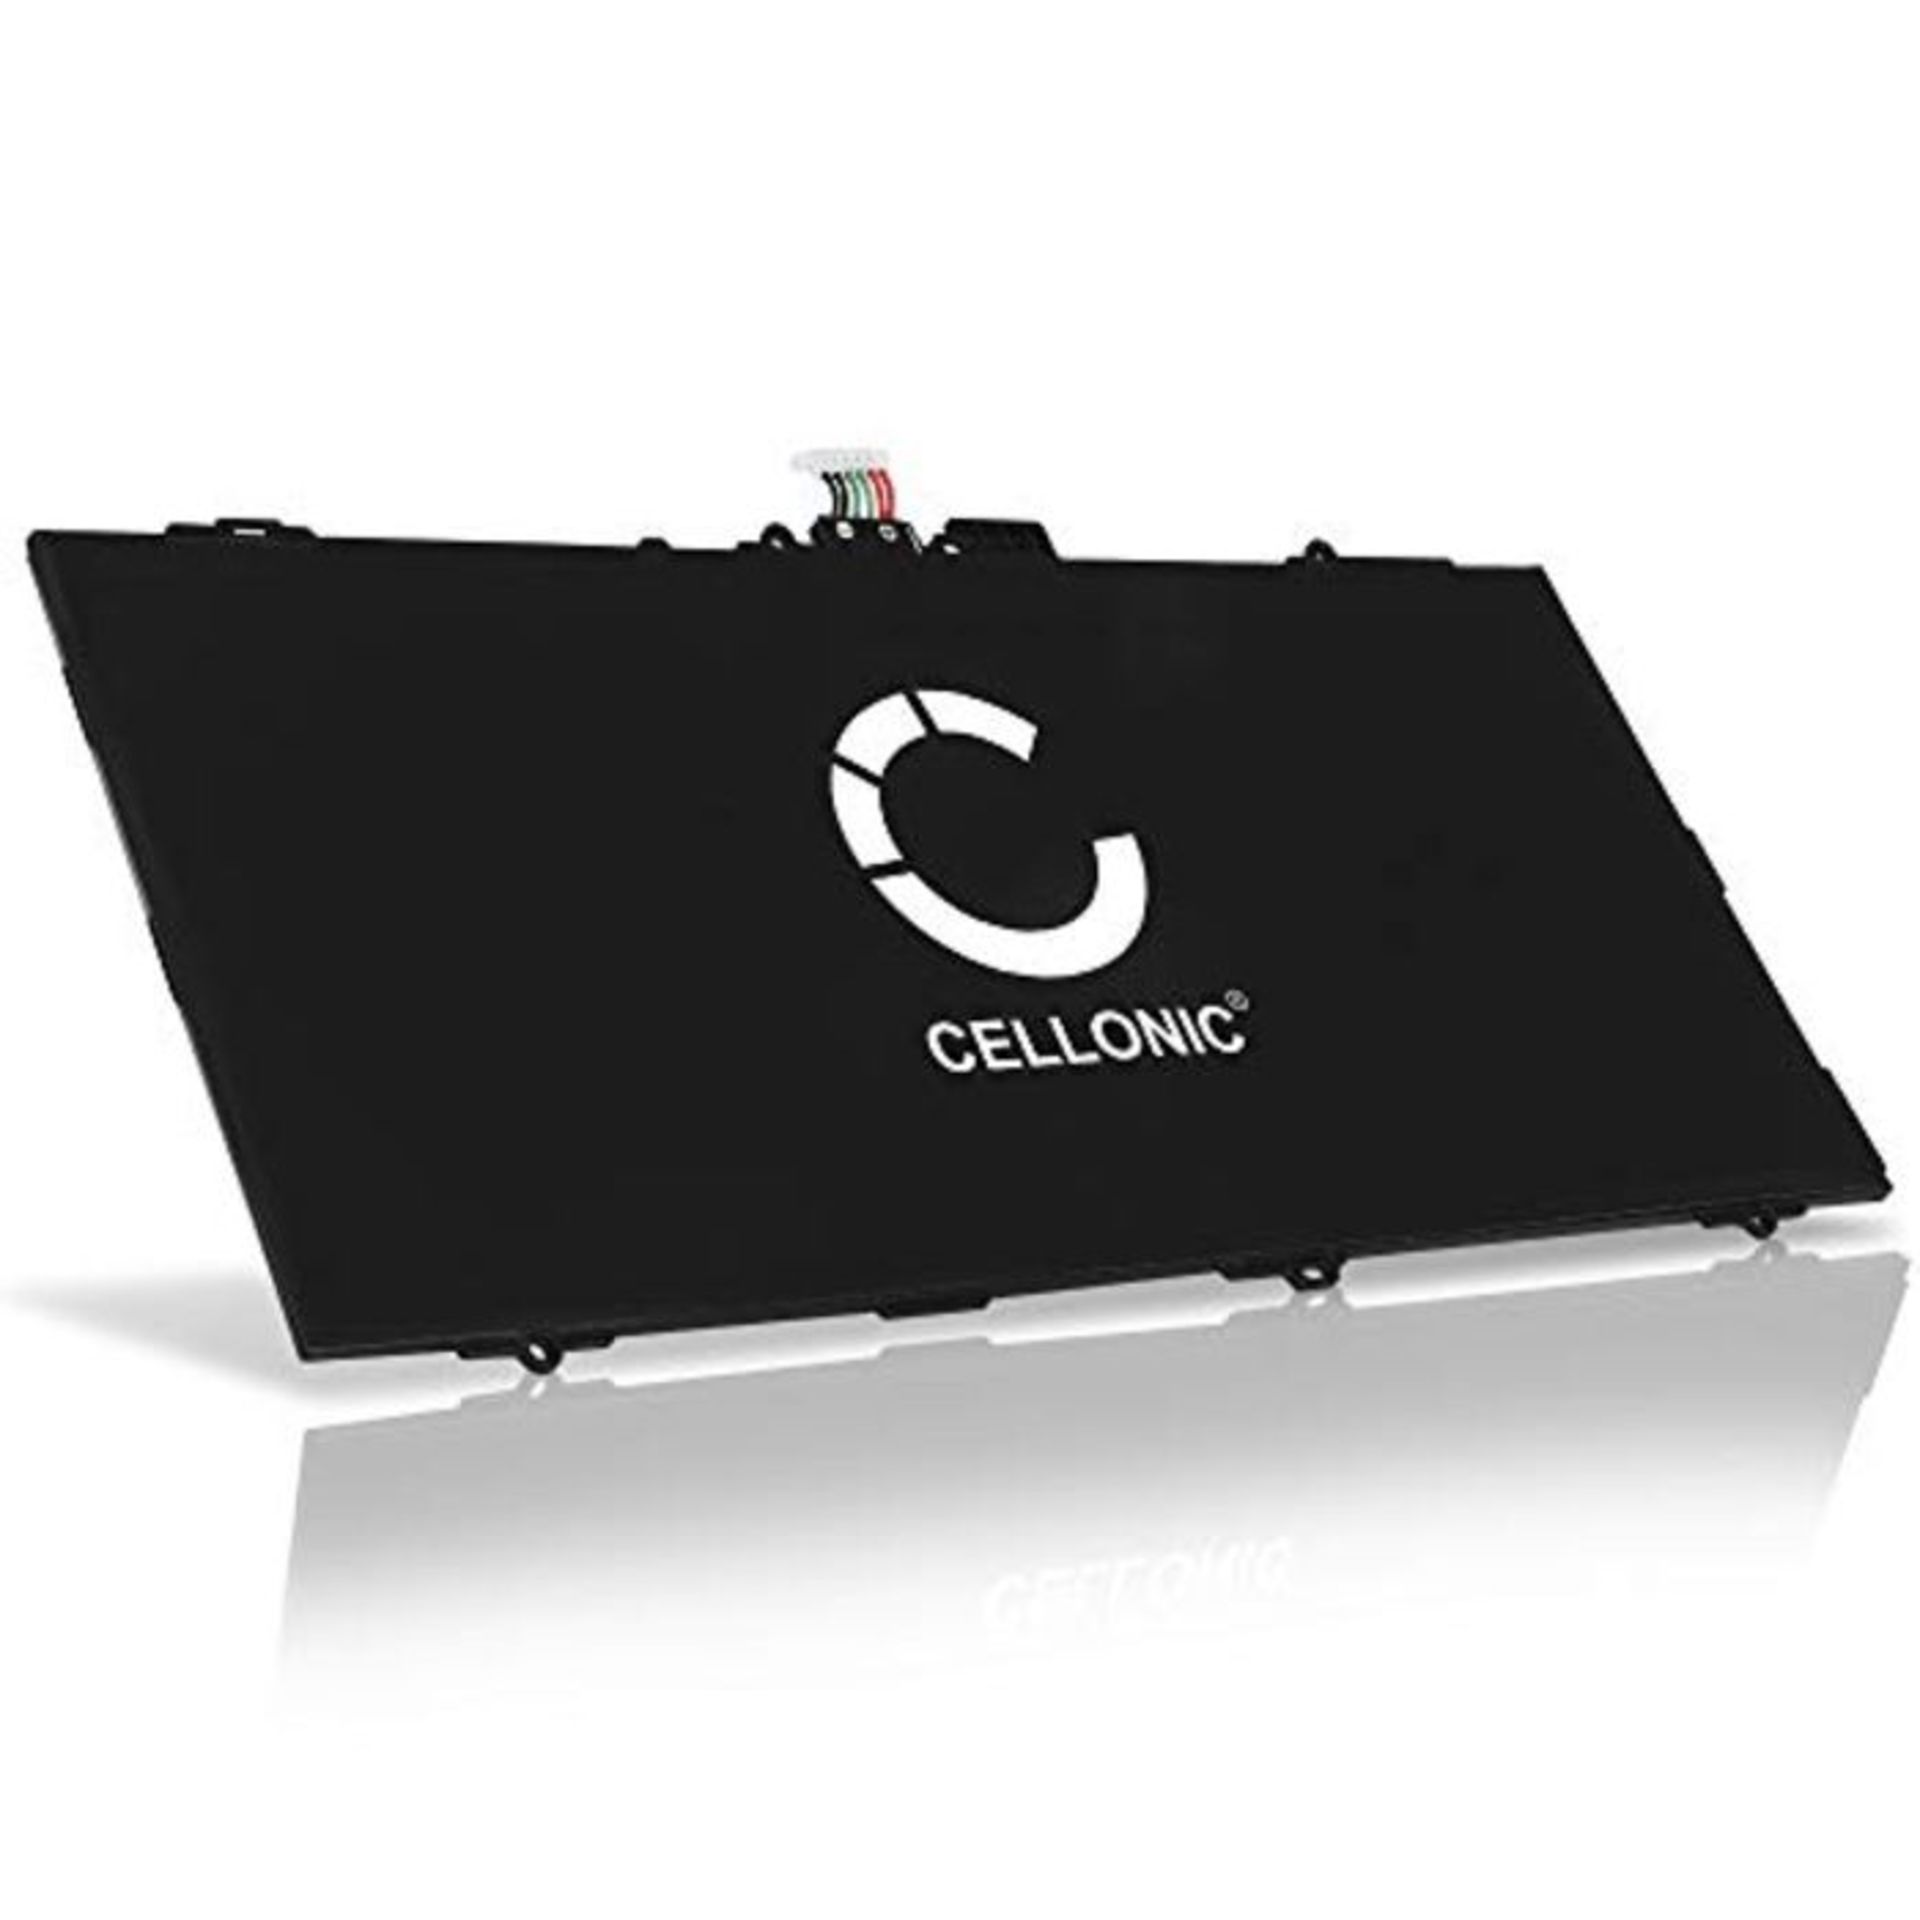 CELLONIC® Replacement Tablet Battery for Samsung Galaxy Tab S 10.5 (SM-T800 / SM-T805 - Image 4 of 6